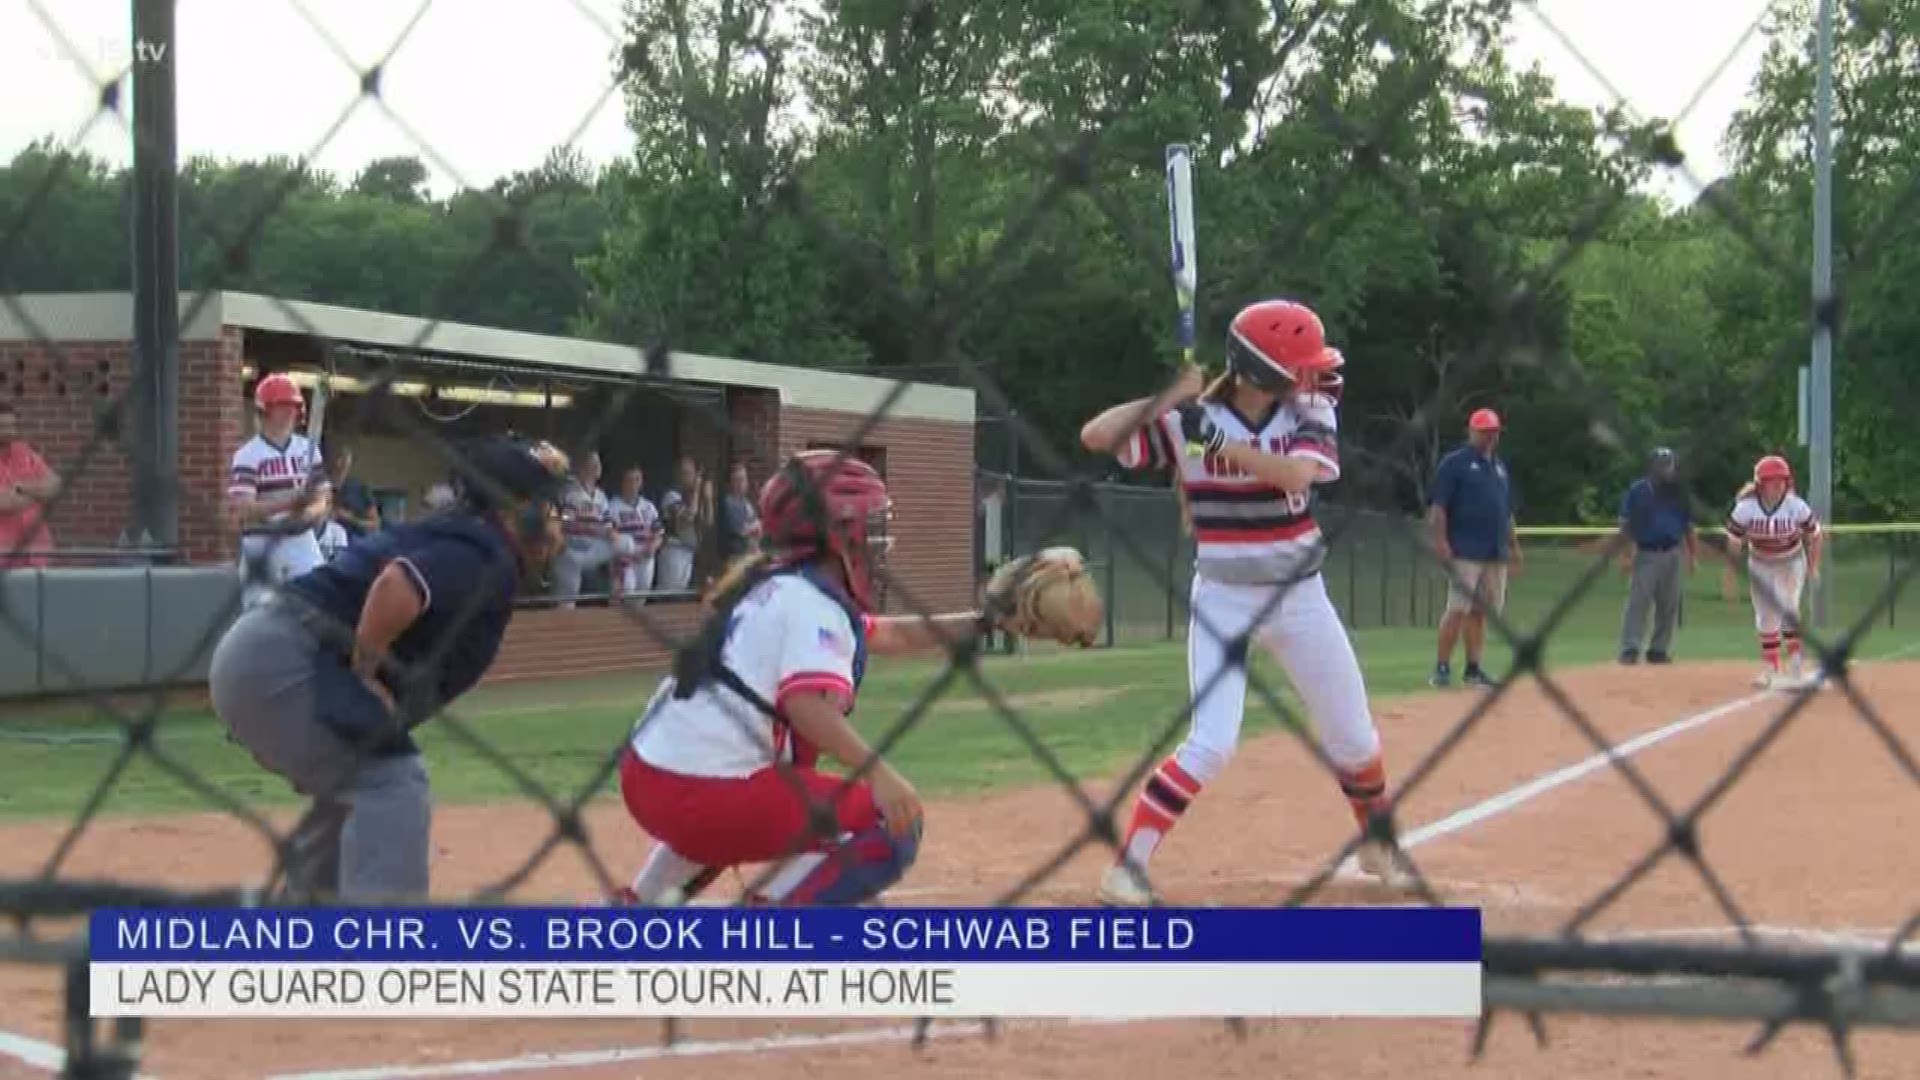 TAPPS state softball tournament gets started cbs19.tv